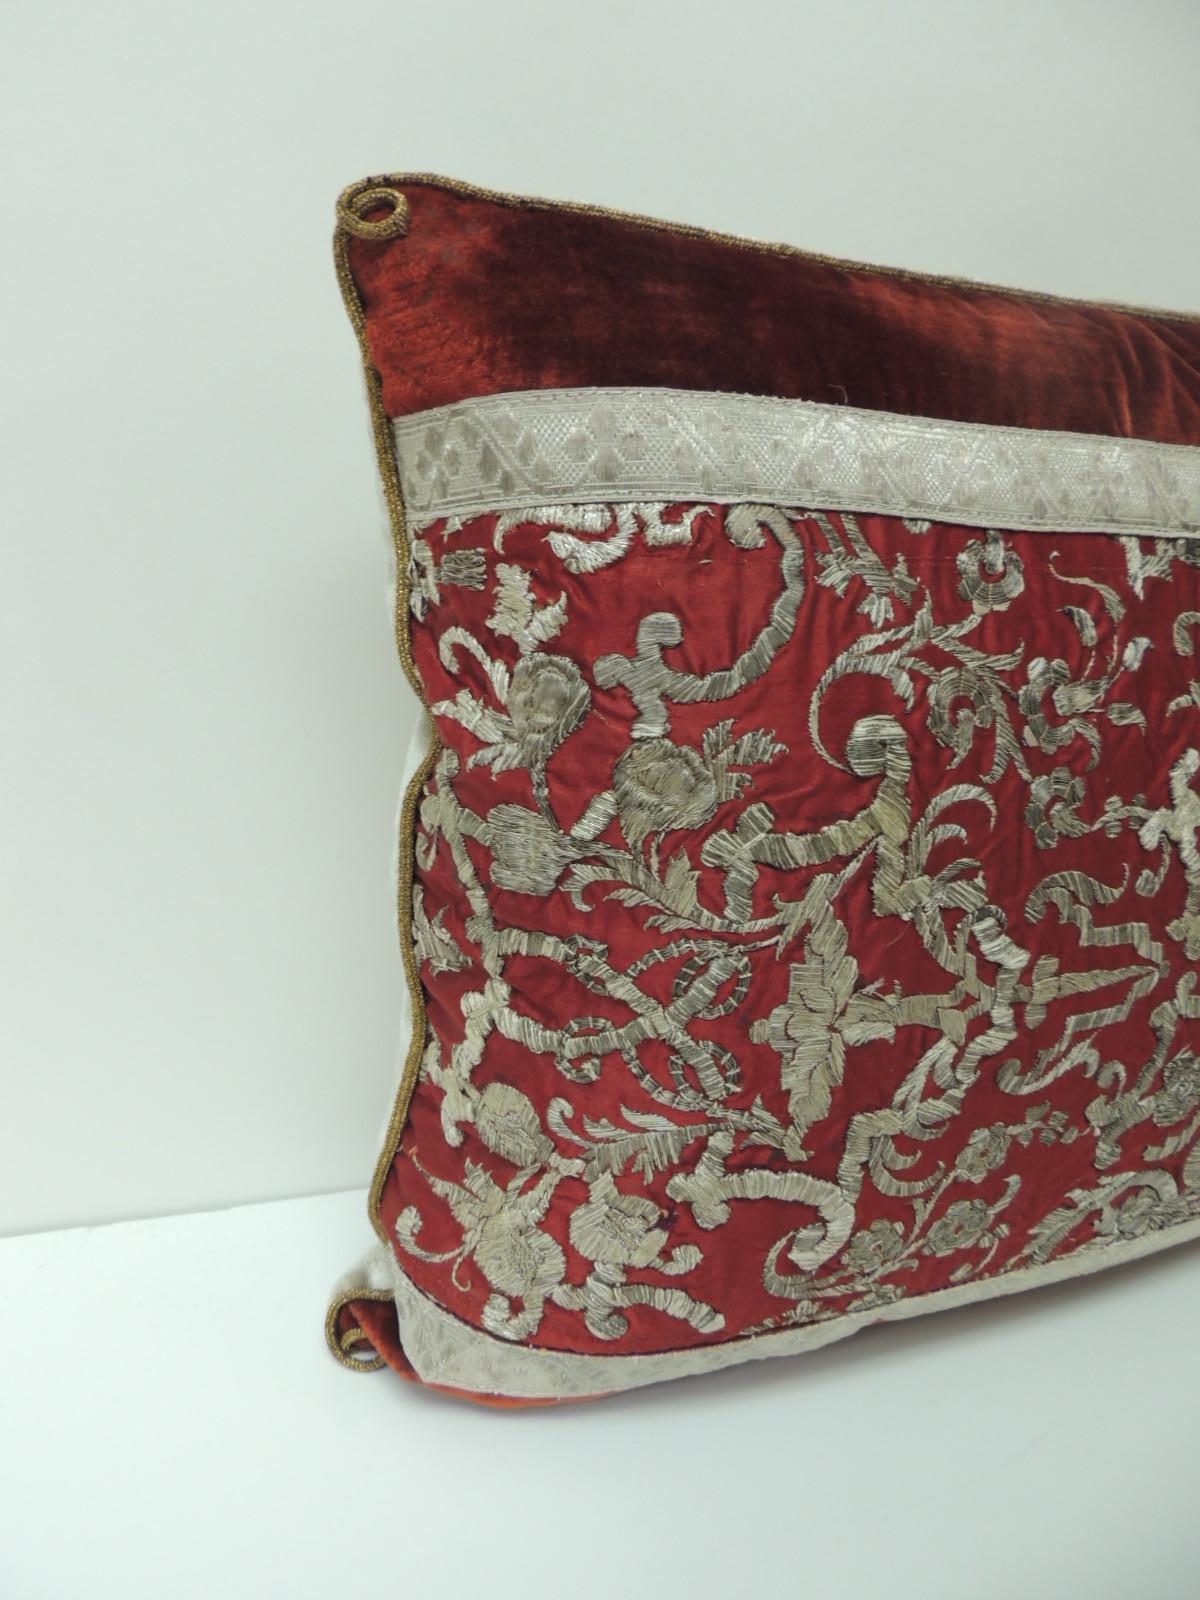 Decorative pillow handcrafted with 19th century Italian metallic silver threads embroidered onto silk. Antique lumbar decorative pillow framed with red silk antique velvet and embellished with 19th century silver metallic flat trims. Accentuated